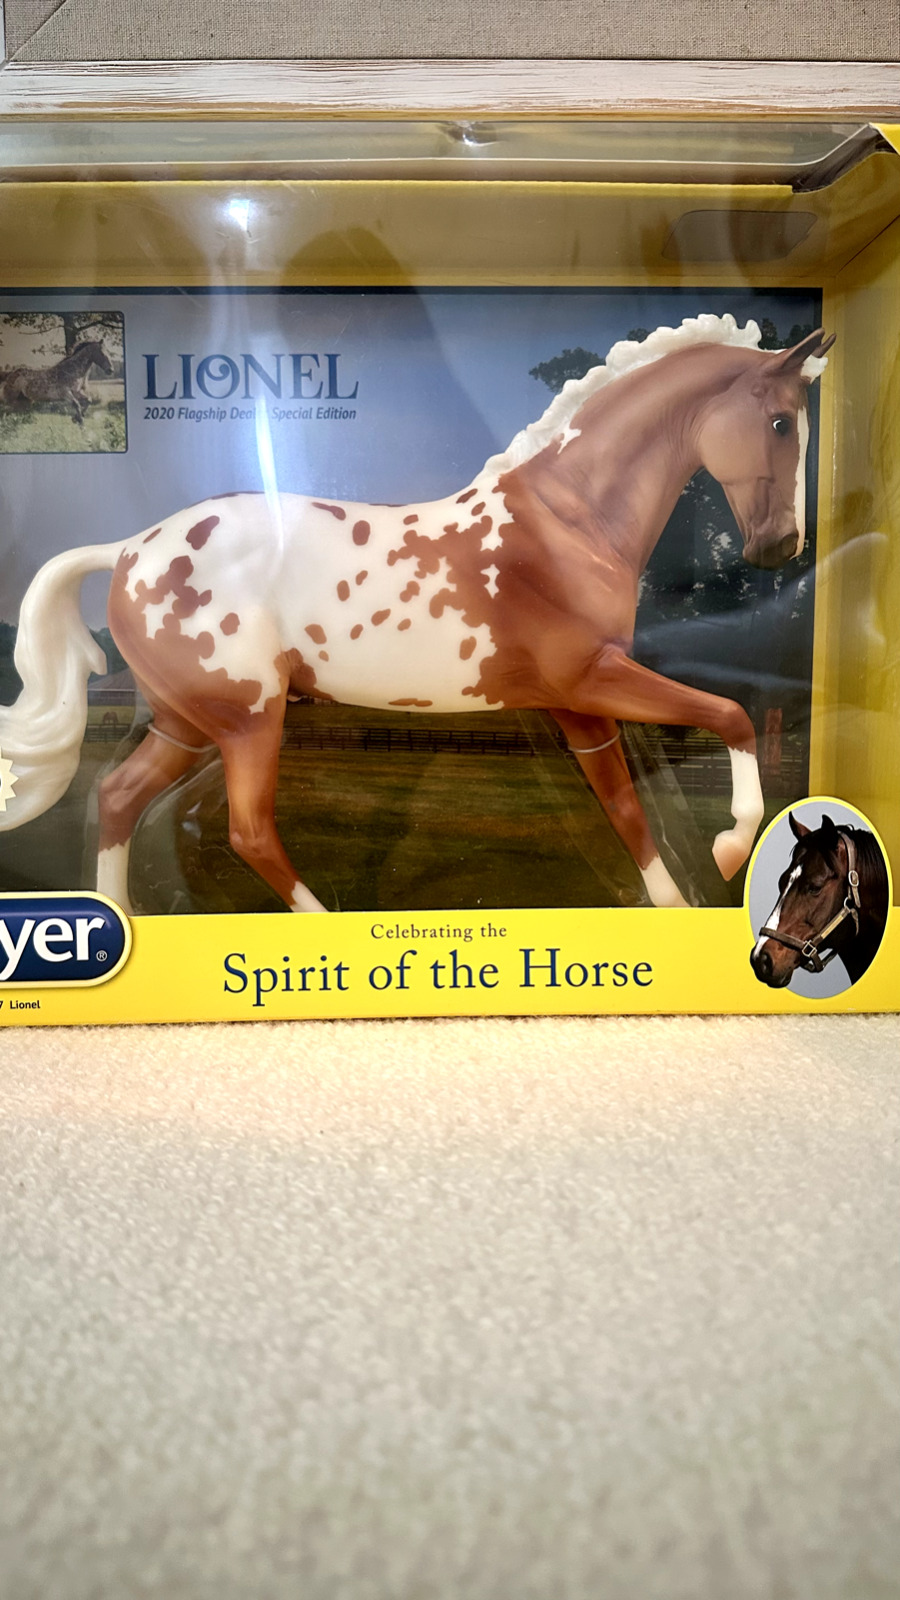 Breyer Lionel 2020 Flagship Dealer Special Limted Edition, Horse New in box